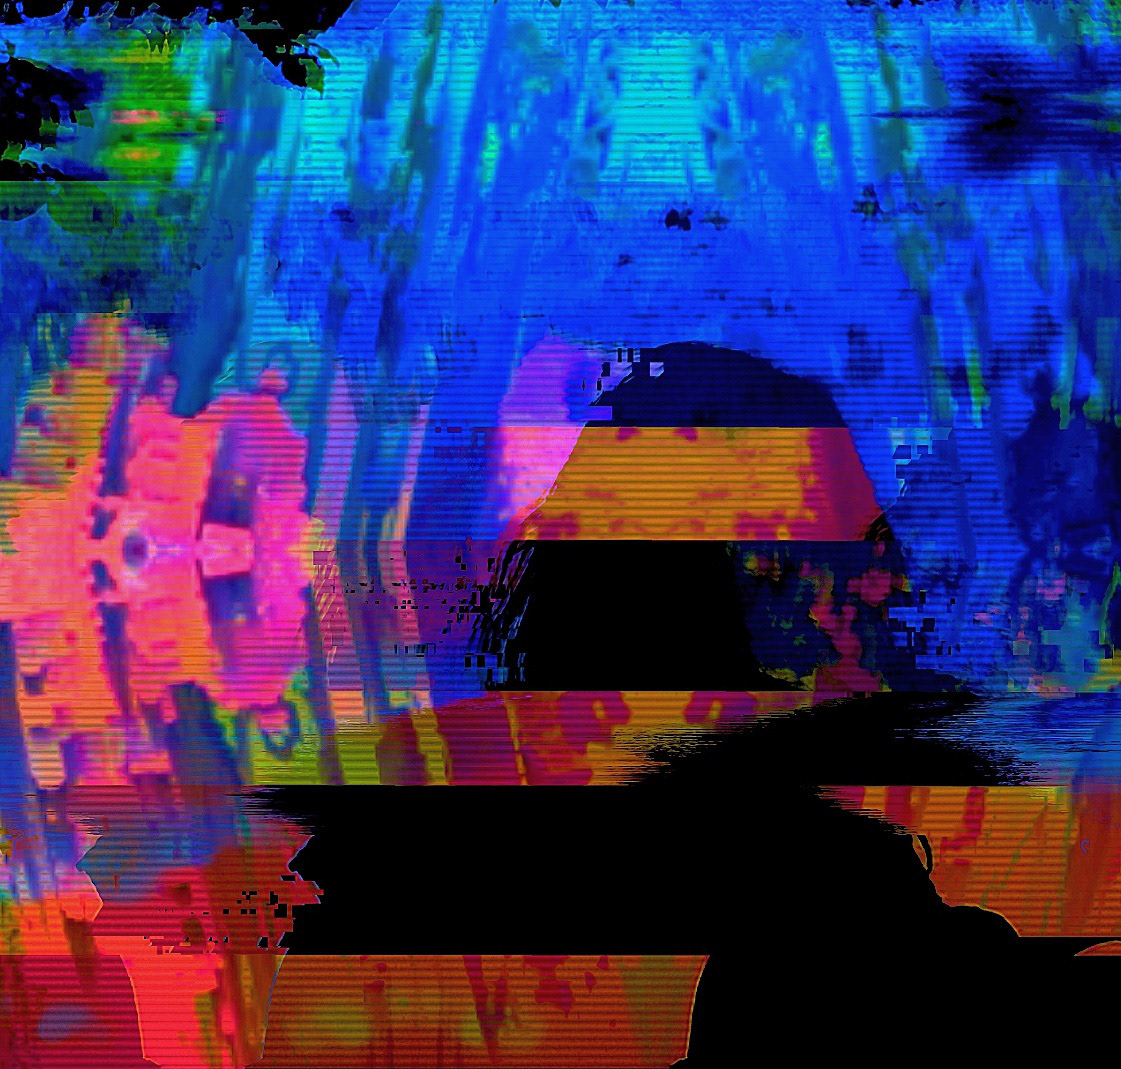 hard glitched composition with kaleidoscopic patterns and someone seen from the back